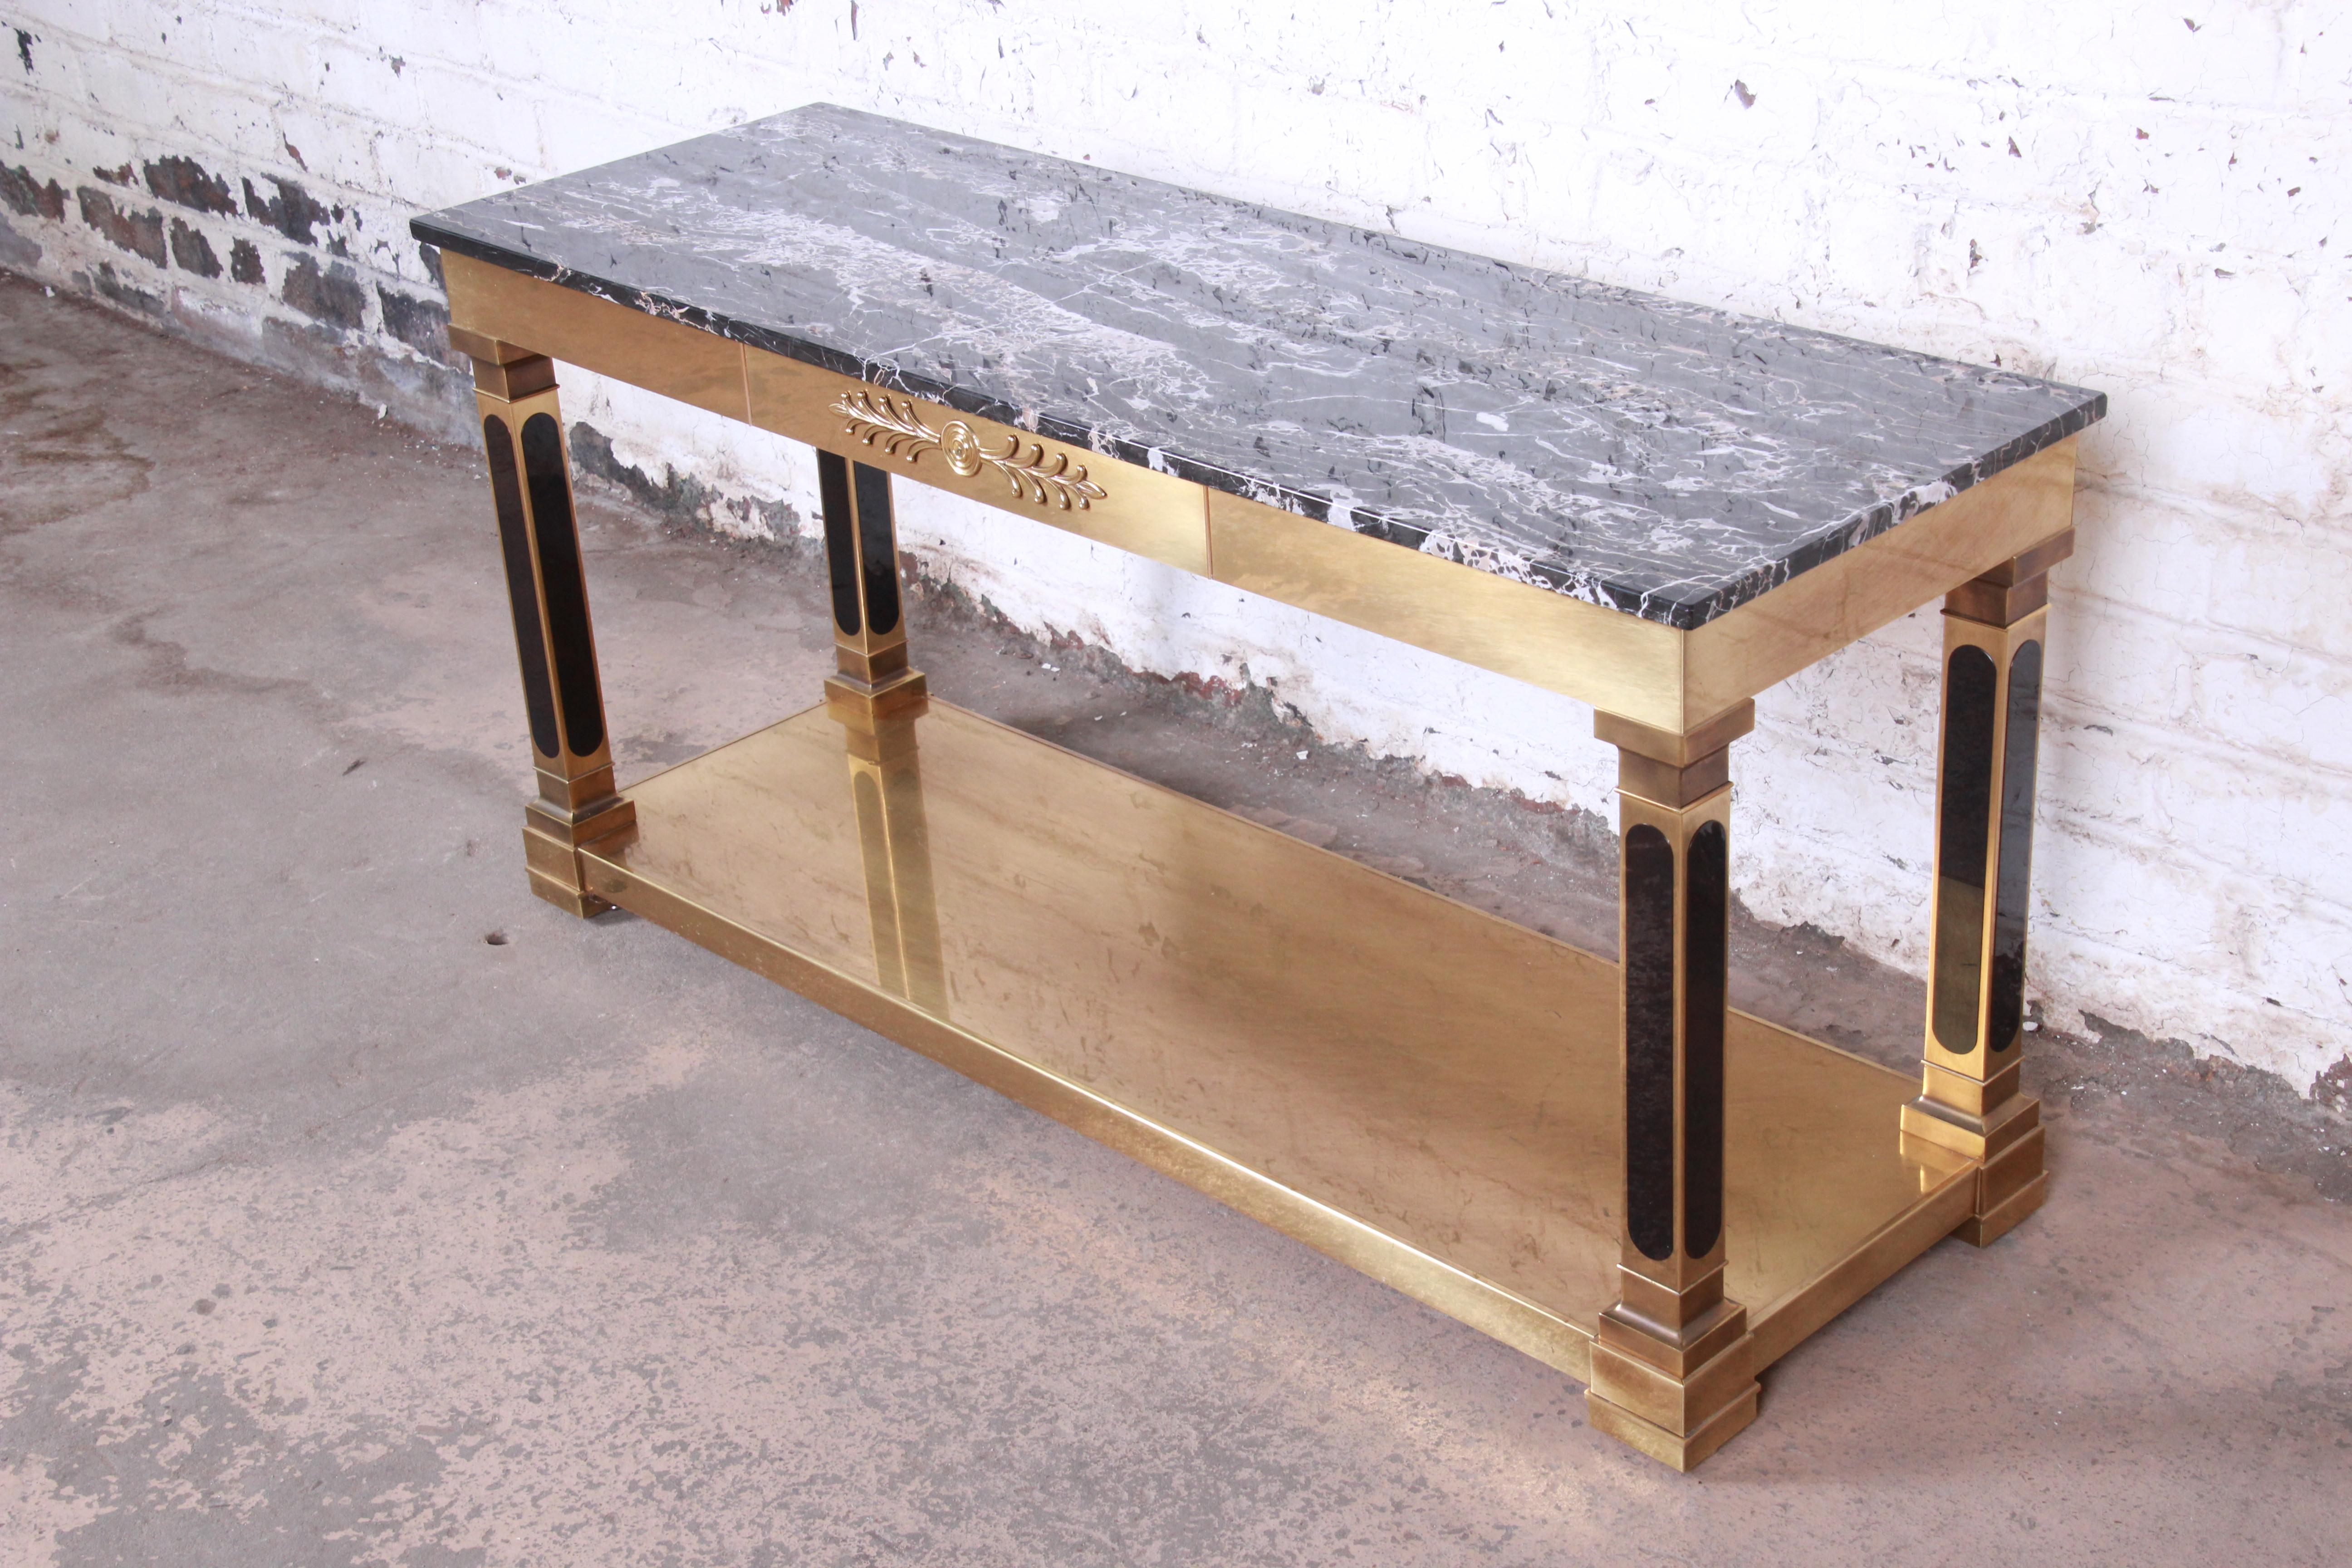 An exceptional midcentury Hollywood Regency console or sofa table by Mastercraft of Grand Rapids. The table features a stunning brass-clad frame with column legs and a beautiful marble top. It is finished on all sides and could be used in the center